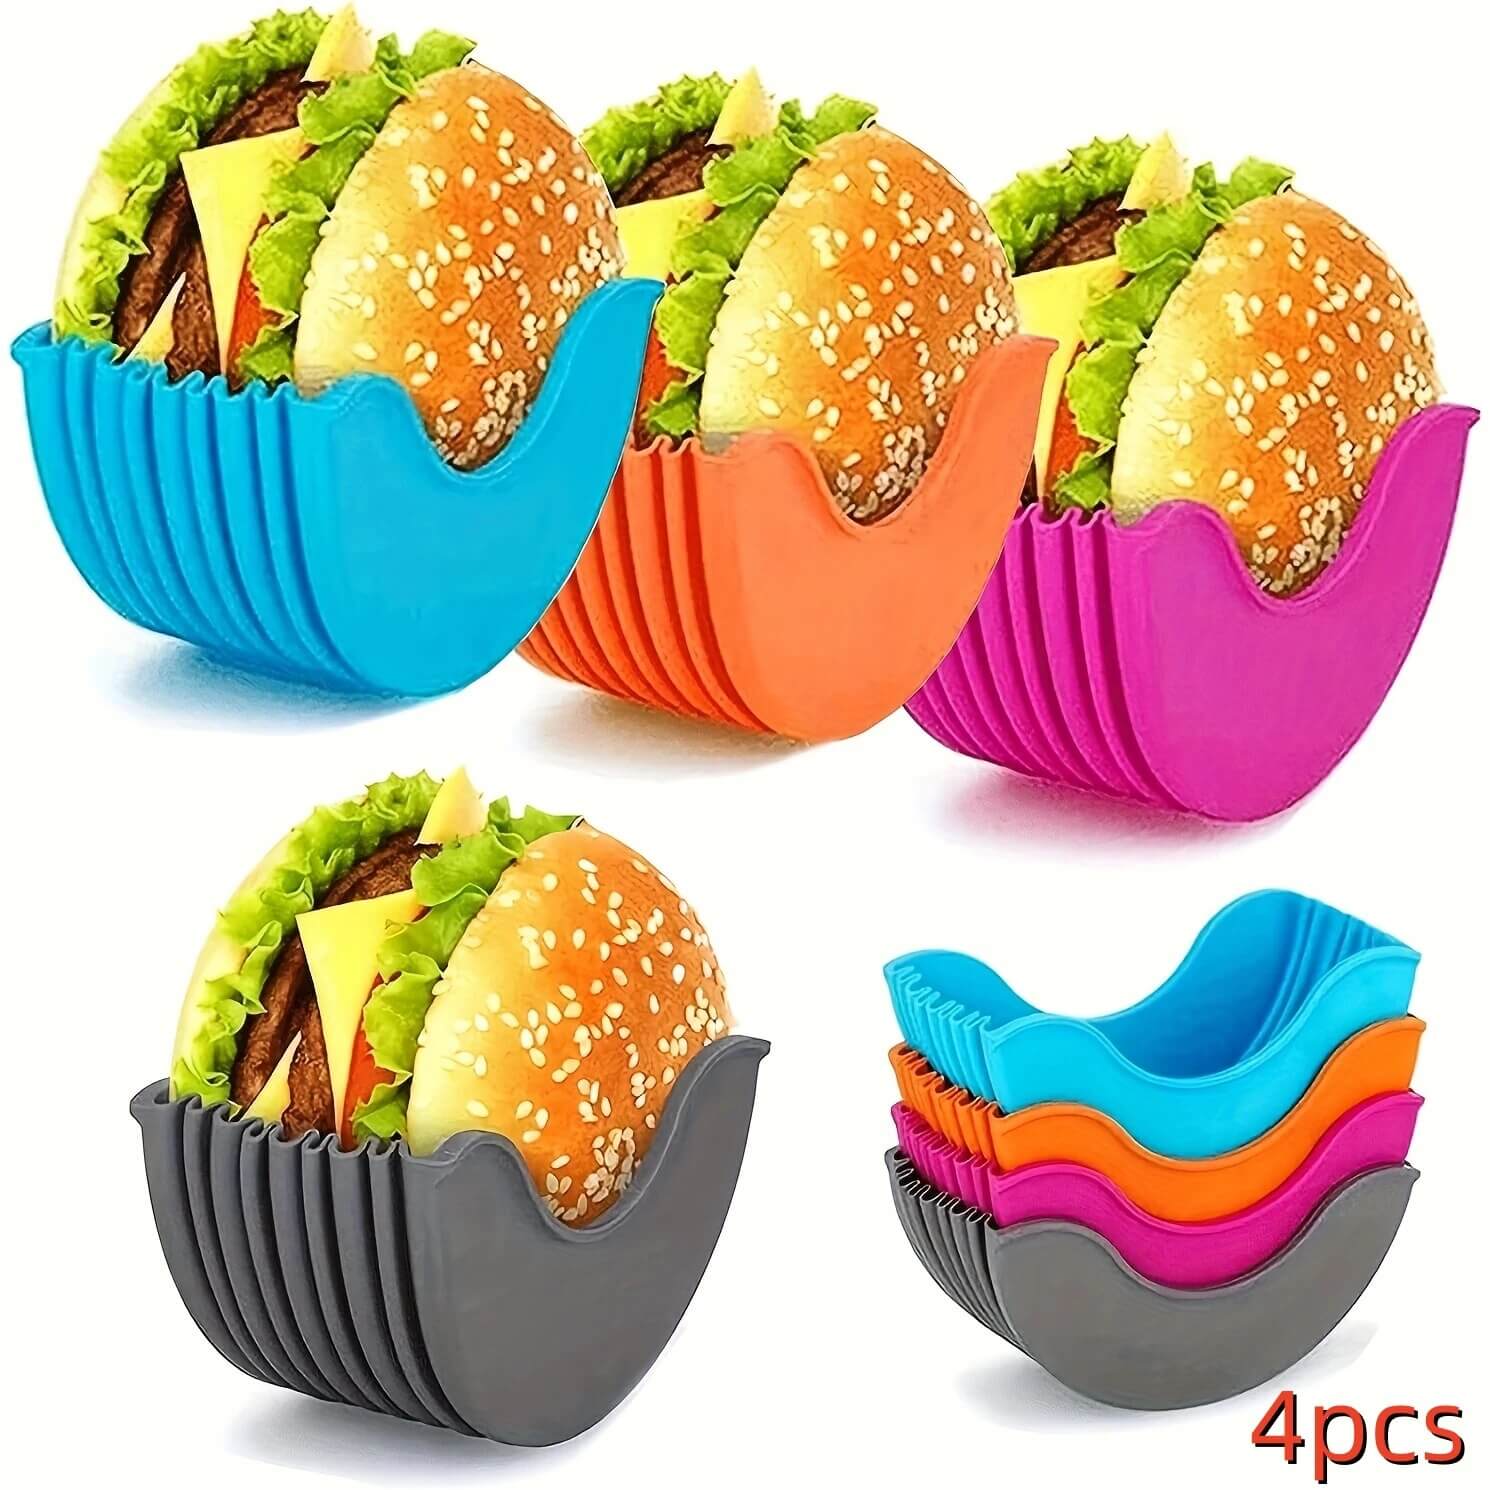 Ultimate Burger Buddy: Retractable Hamburger Holders with Sauce Stations